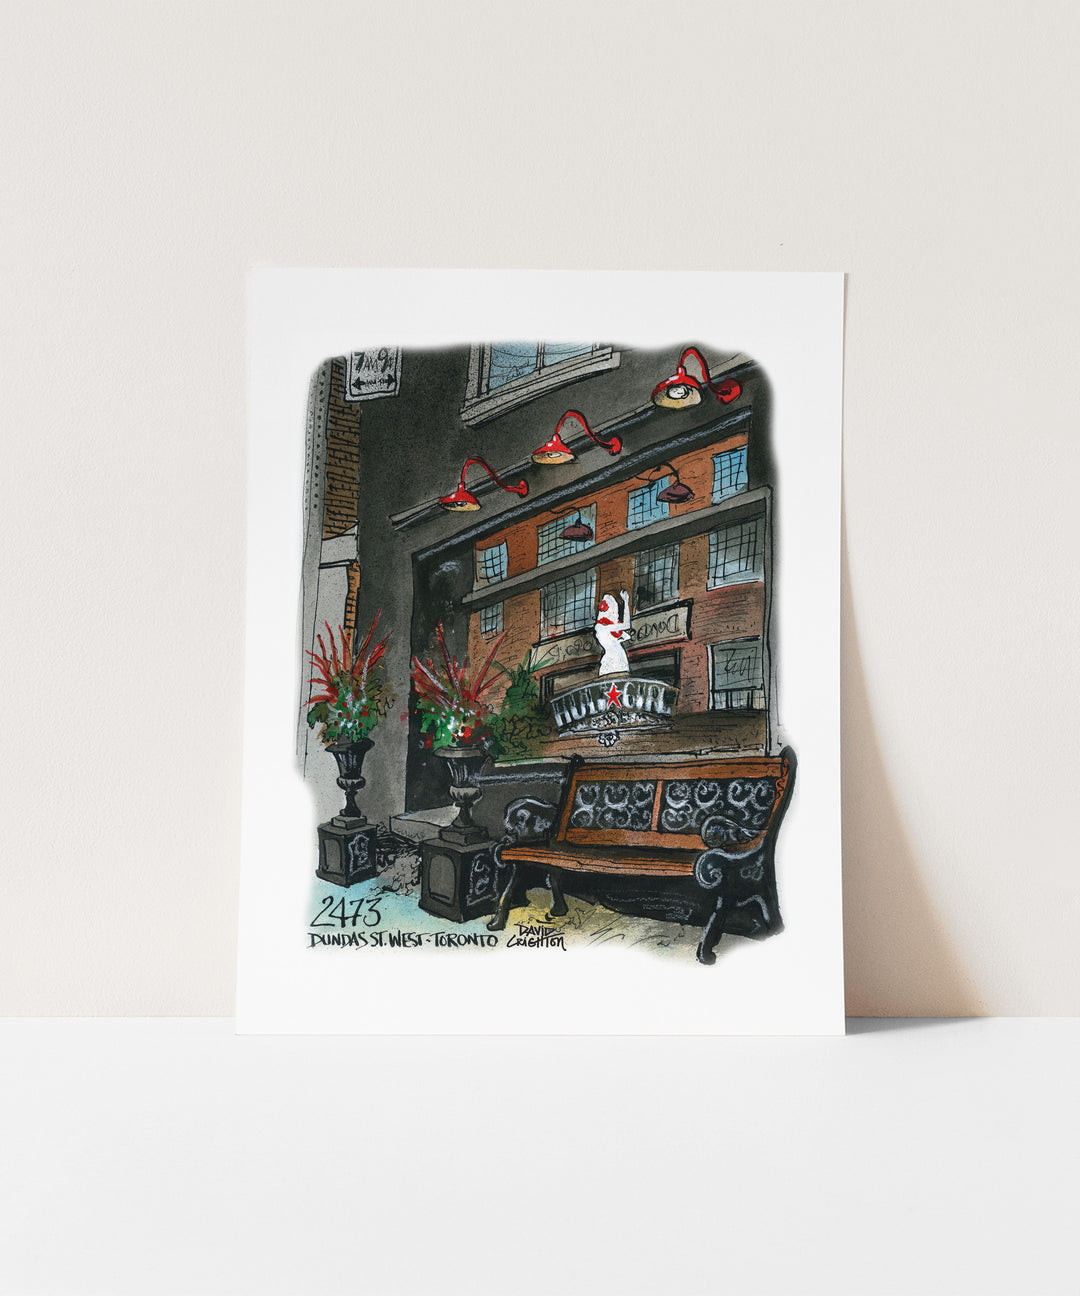 Toronto Poster featuring the Hula Girl Expresso Bar, by Totally Toronto Art